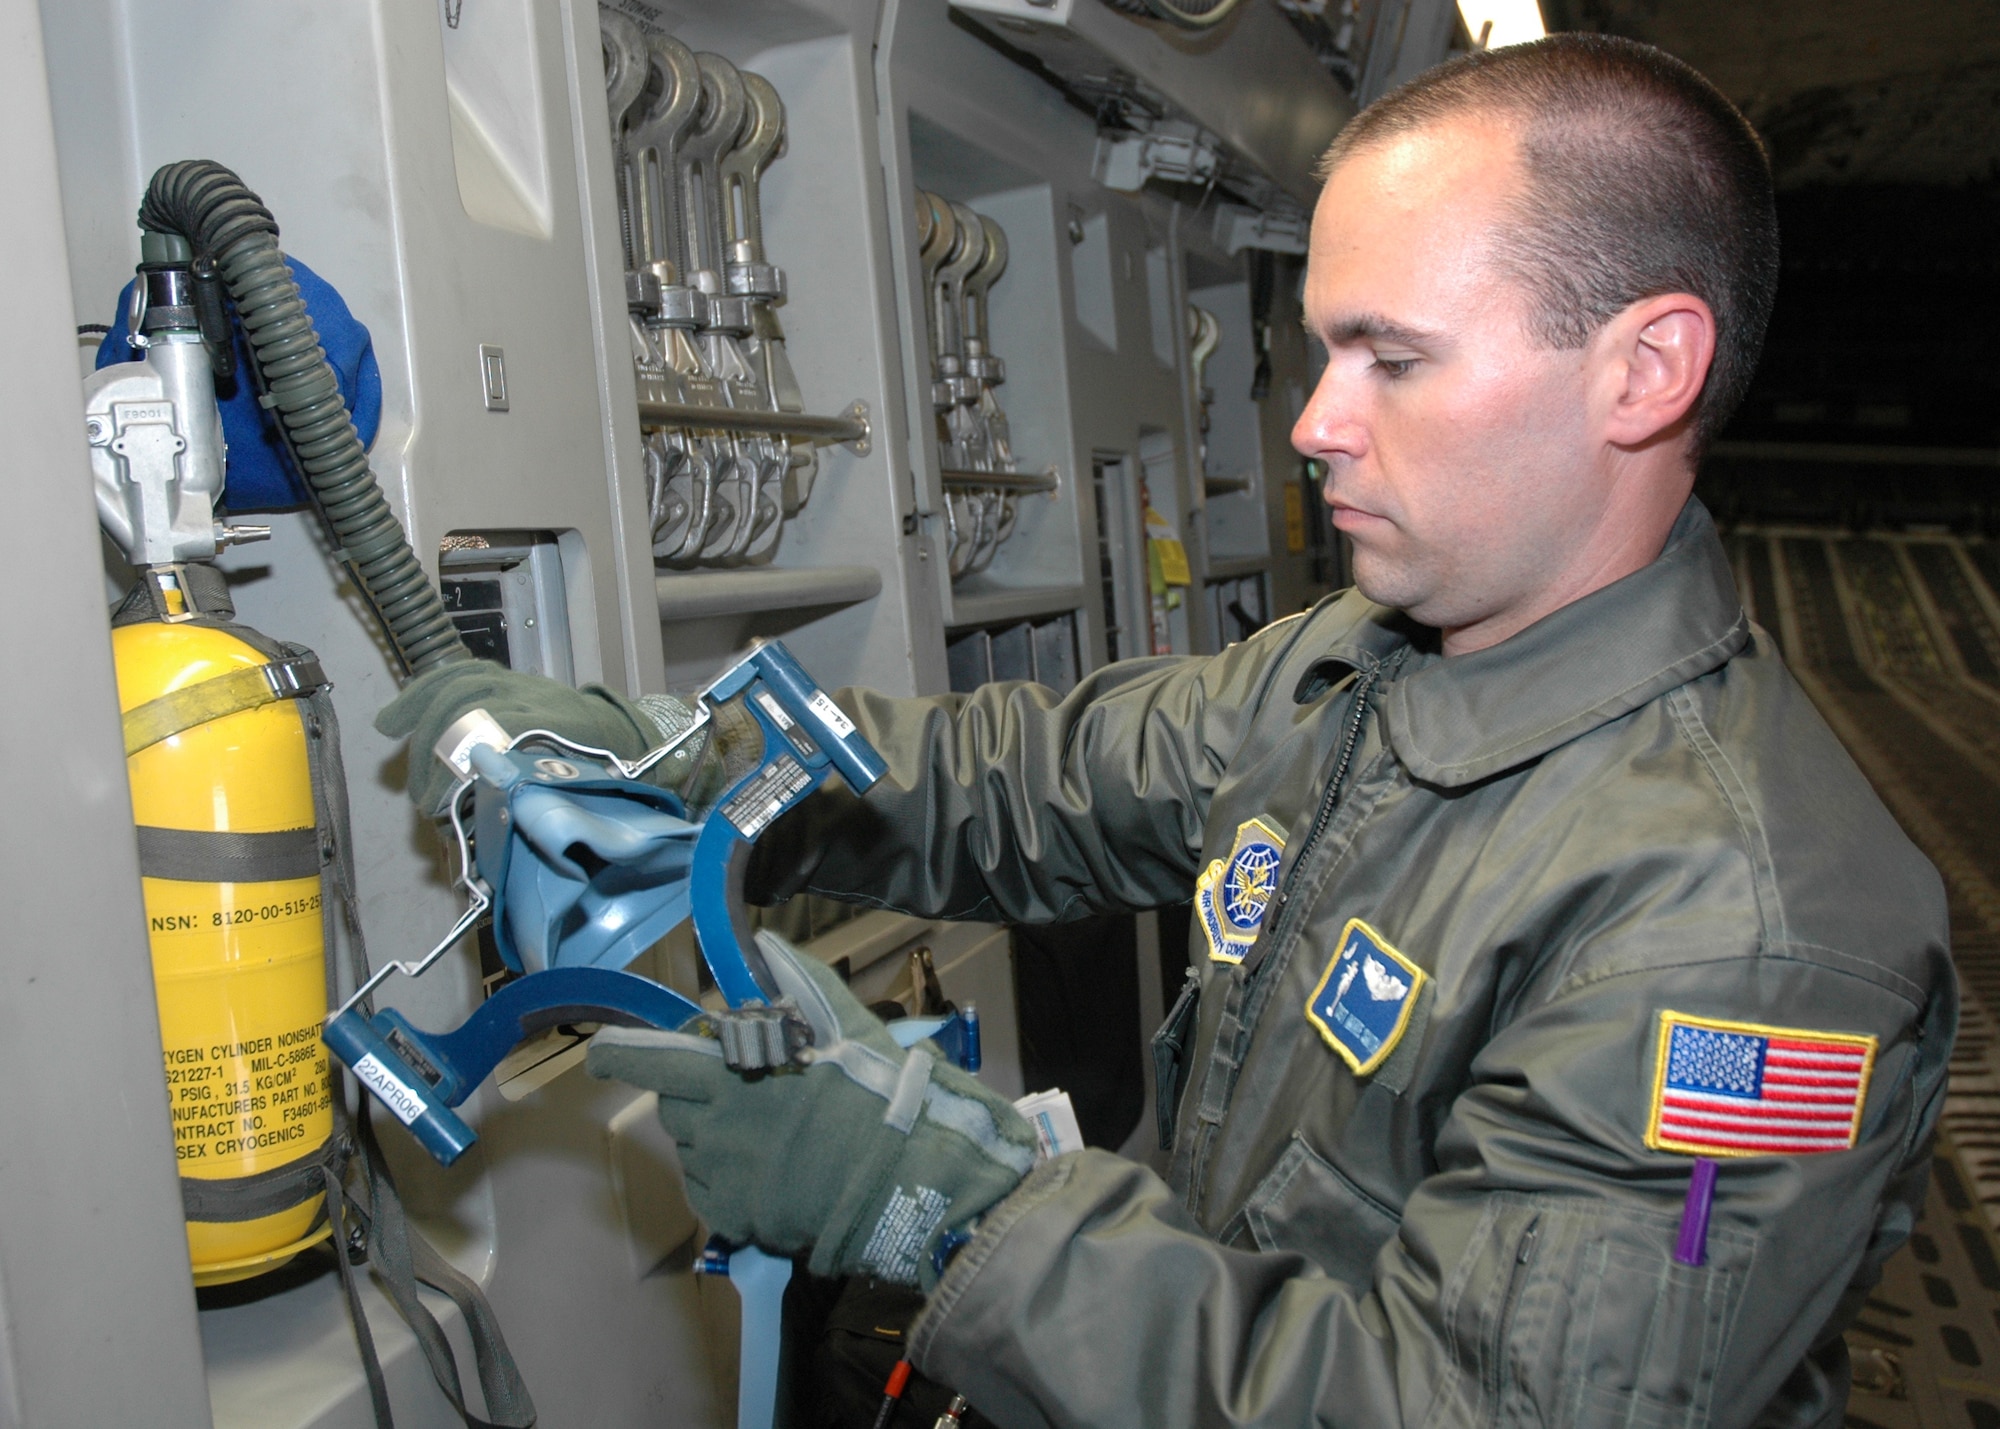 Tech. Sgt. Mike Smith, a reserve loadmaster with the 300th Airlift Squadron, Charleston AFB, S.C., checks an oxygen mask as part of his preflight check list aboard a C-17 Globemaster III, during a recent training mission.  (Photo by 1st Lt. Wayne Capps, USAFR)